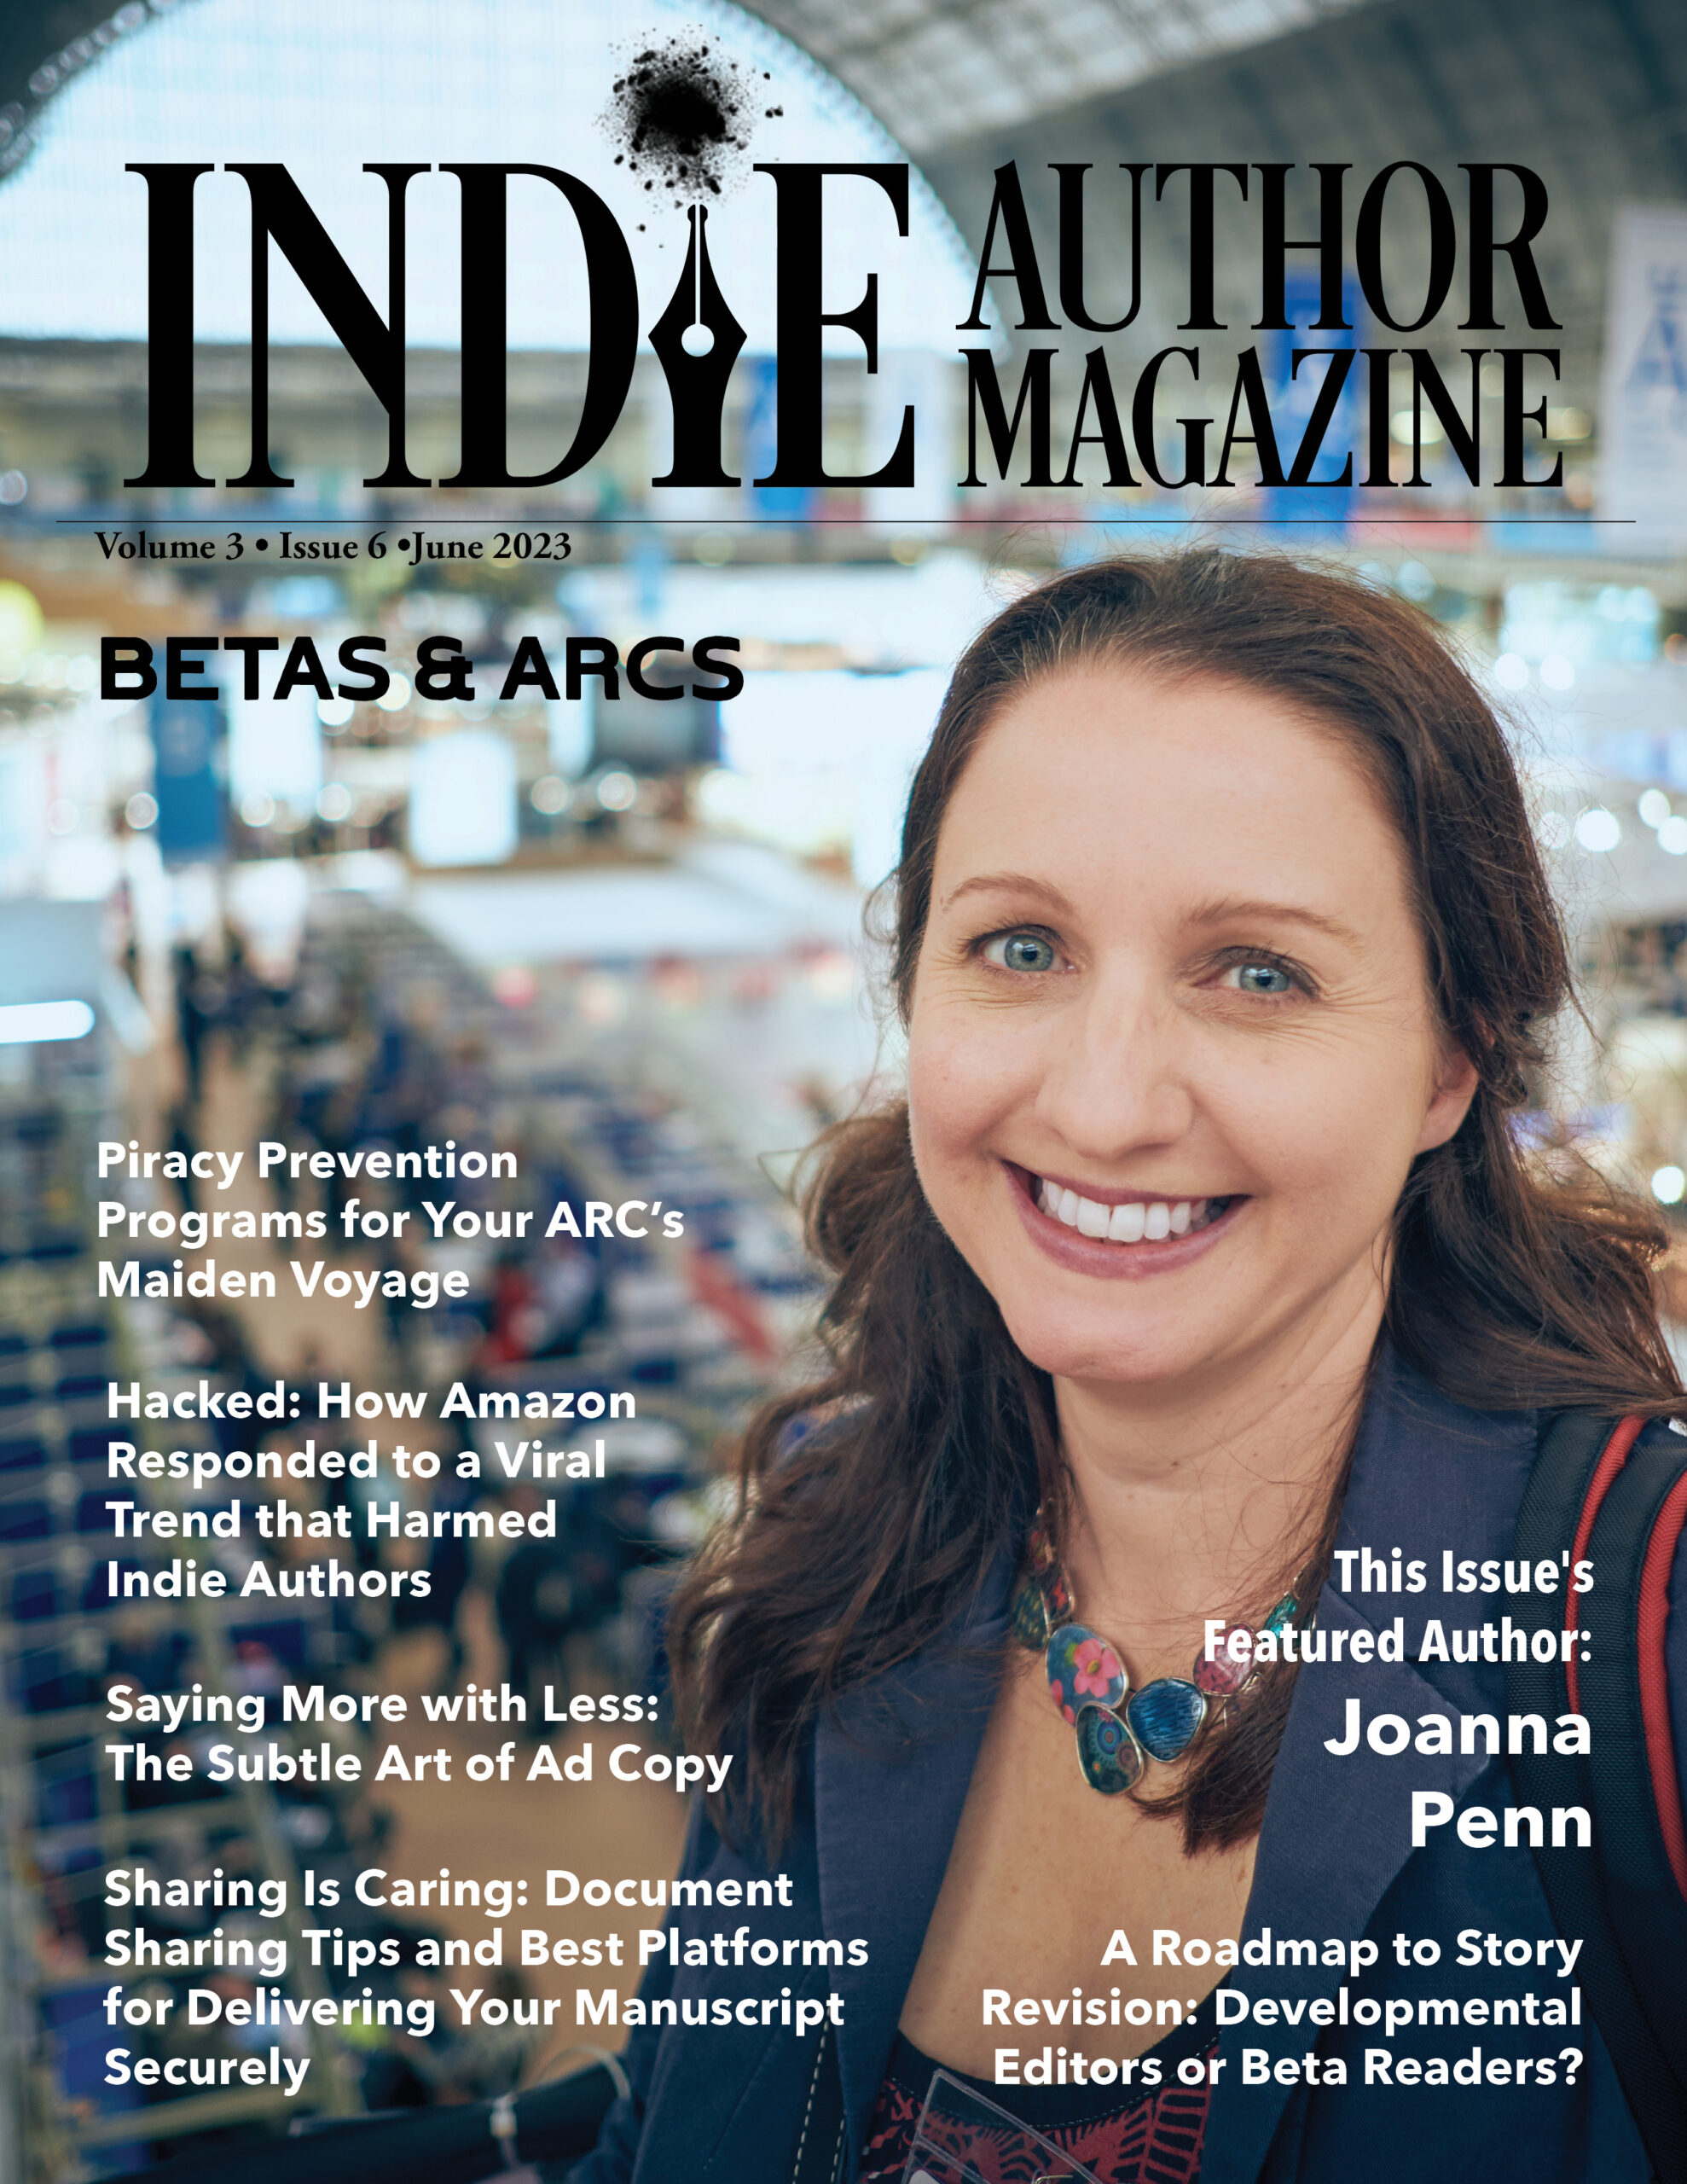 Joanna Penn on the Cover of Indie Author Magazine June 2023